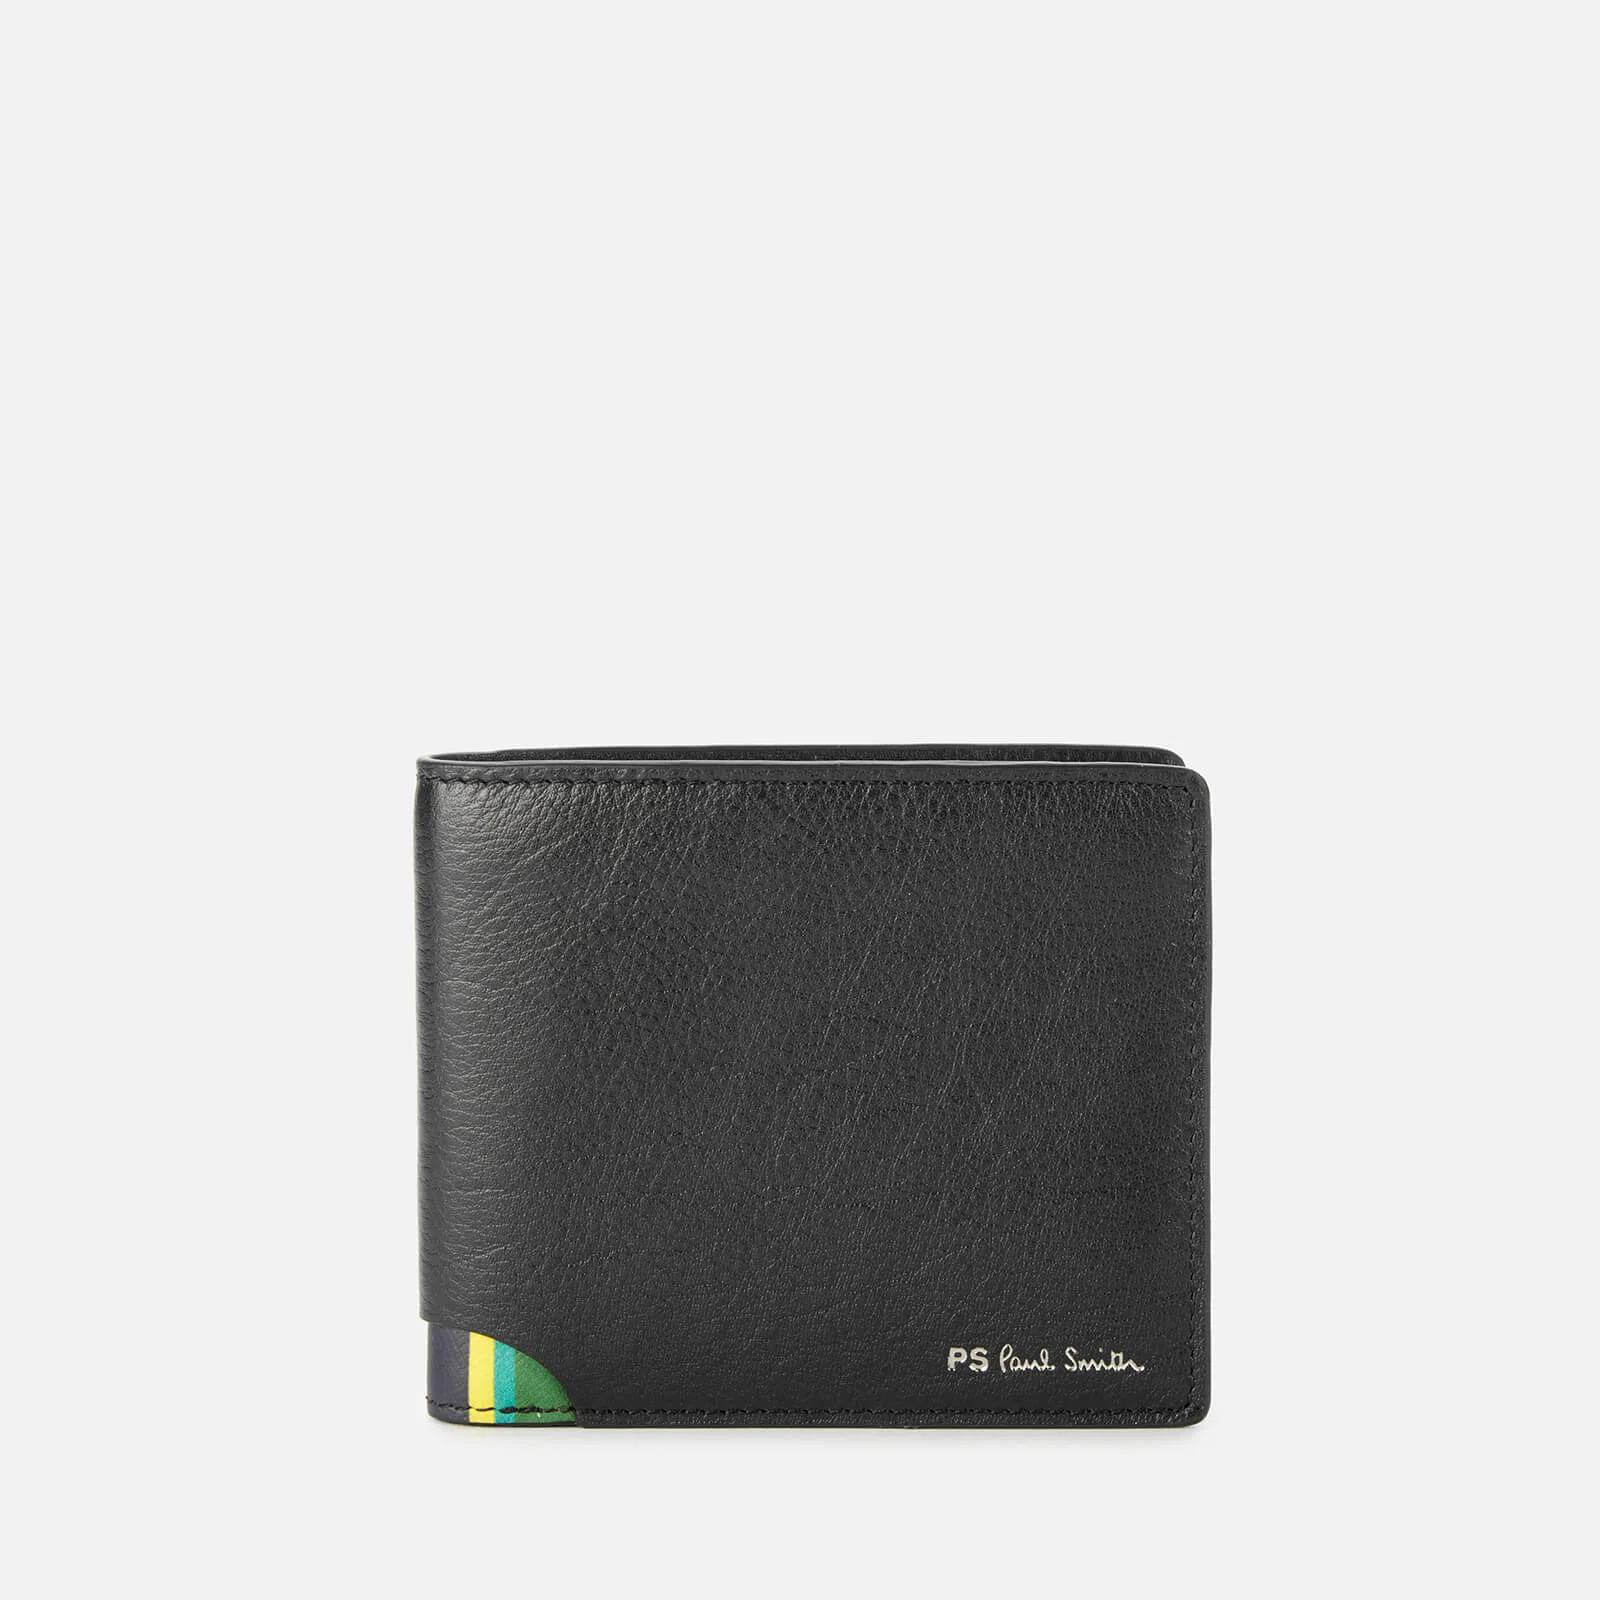 PS by Paul Smith Men's Signature Stipe Billfold Wallet - Black Image 1